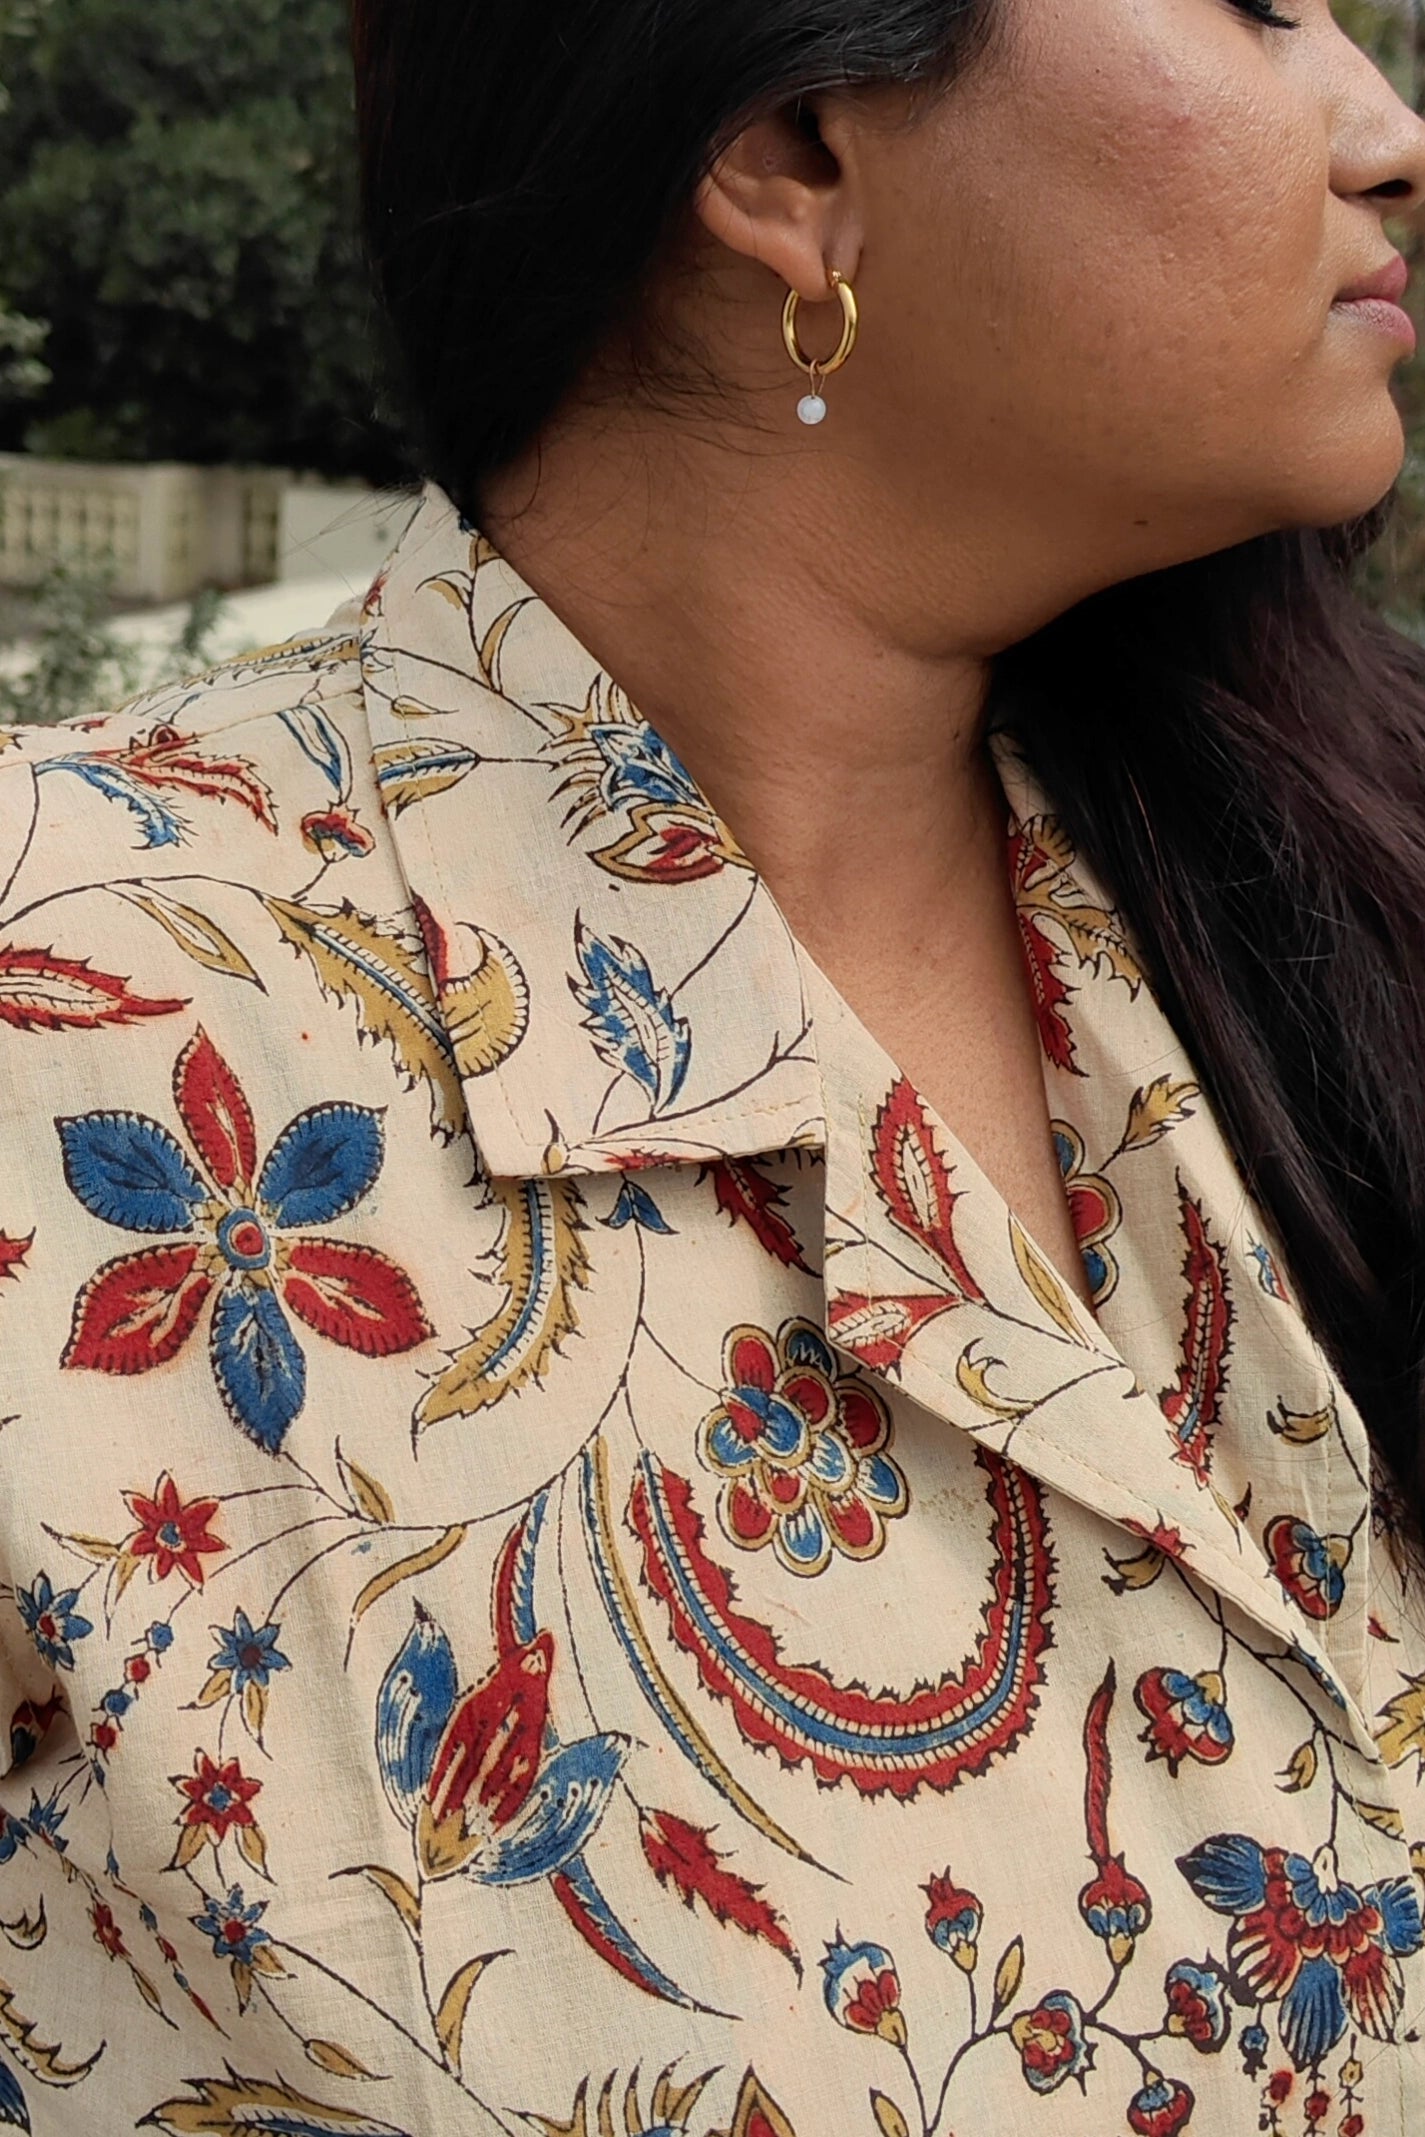 Ilamra hand block printed Kalamkari art organic cotton naturally dyed in shades of Indigo, madder red and warm mustard, overlapping waistcoat that is double-breasted, classic notched collar, relaxed fit pants